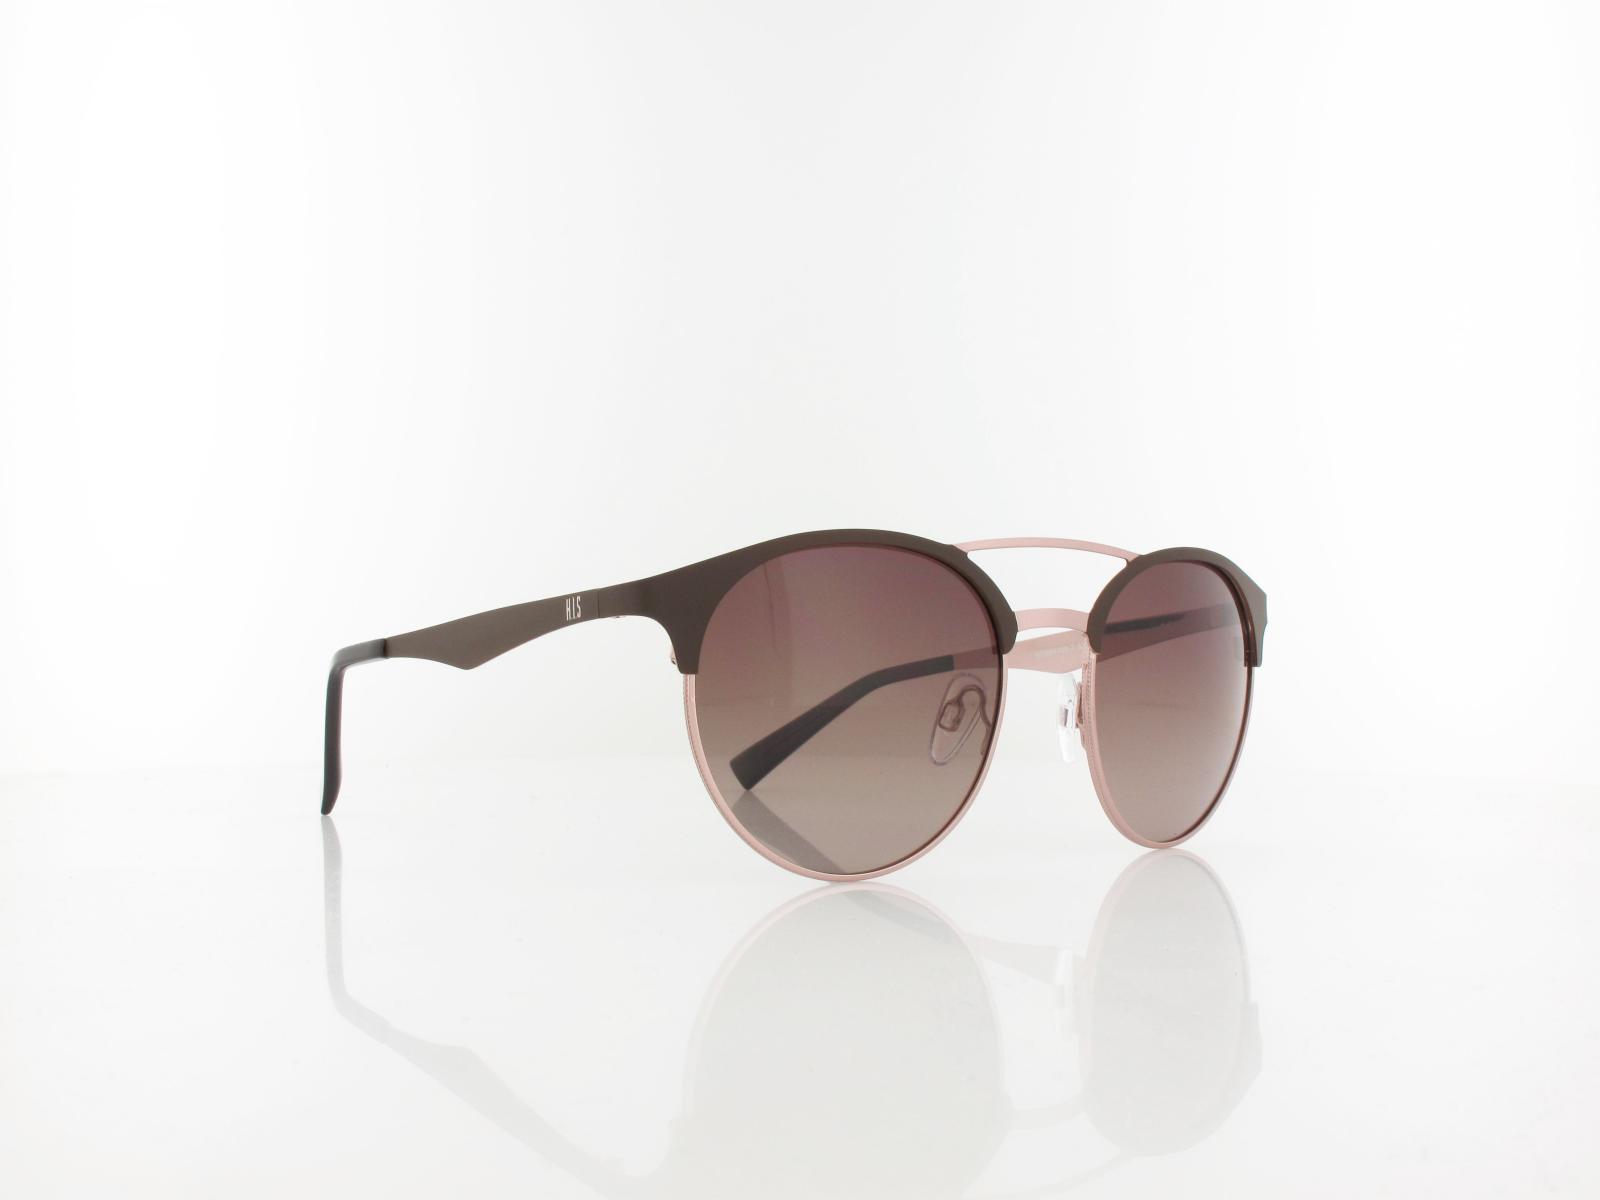 HIS polarized | HPS94108-2 53 | brown / brown gradient with silver flash polarized